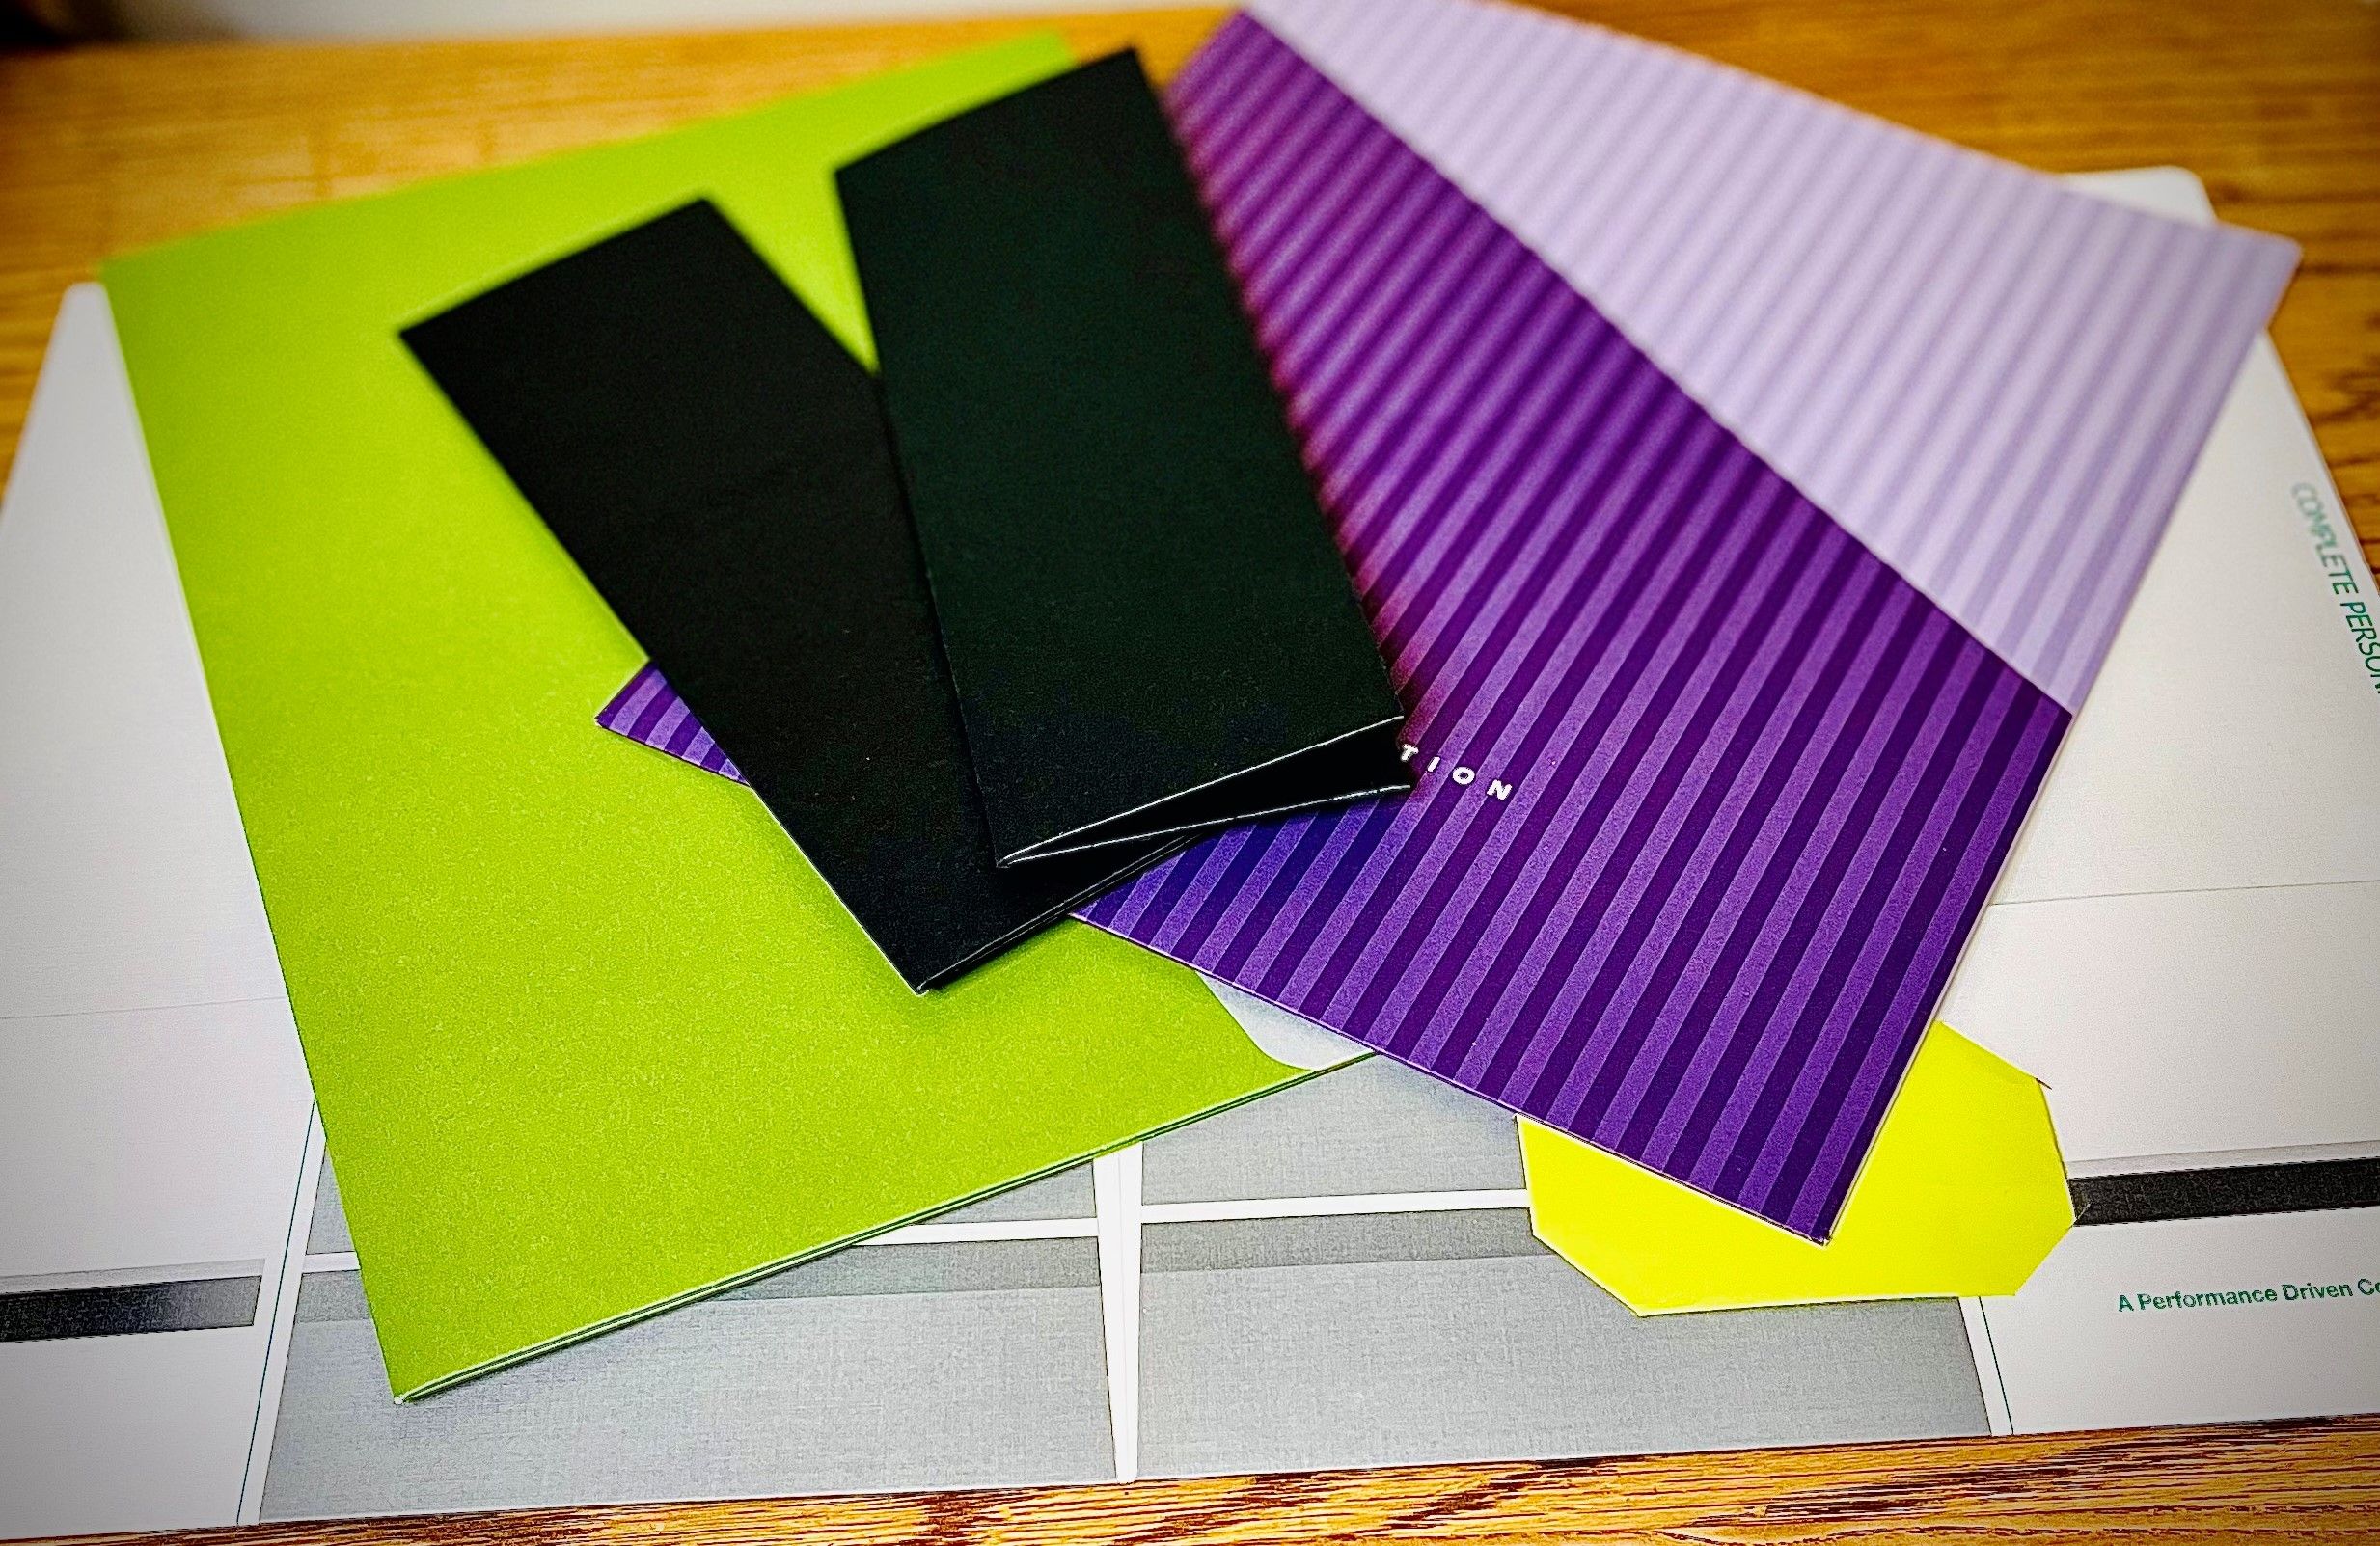 Printed, cut, glued or hand tapped, and folded. BCO can create folders of many shapes and sizes.